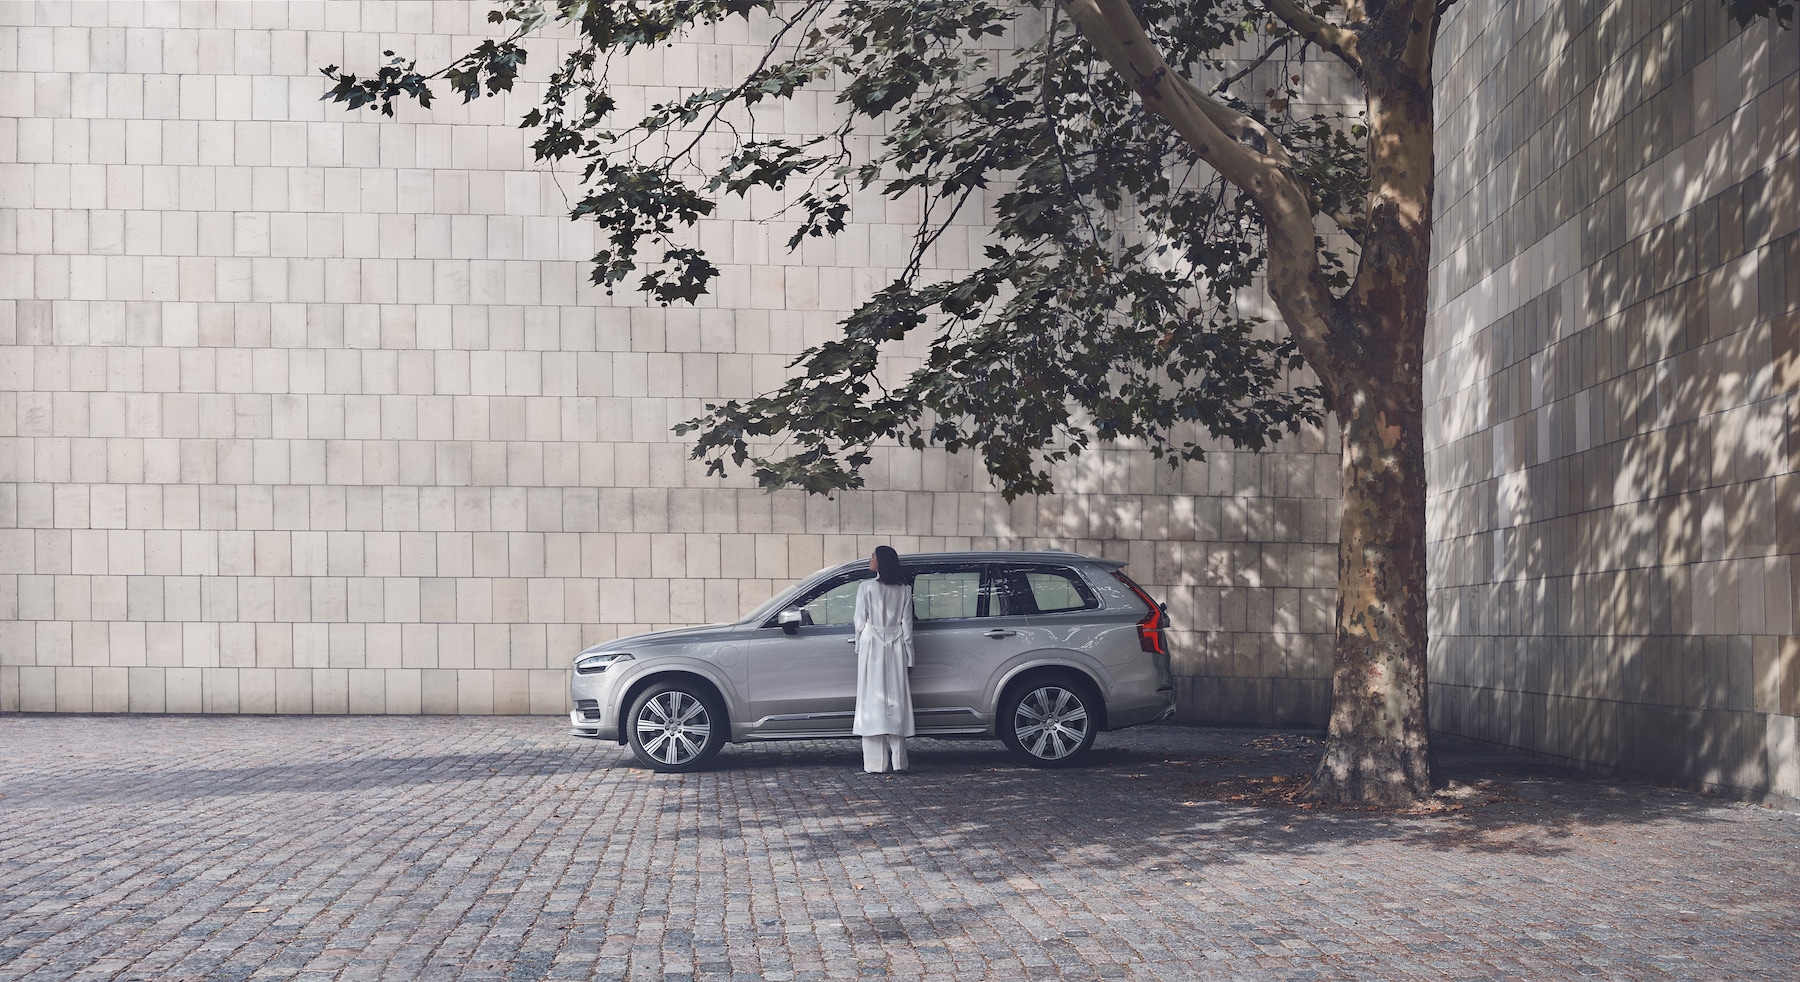 About Volvo Cars New Bern | Volvo XC90 Parked Under Tree